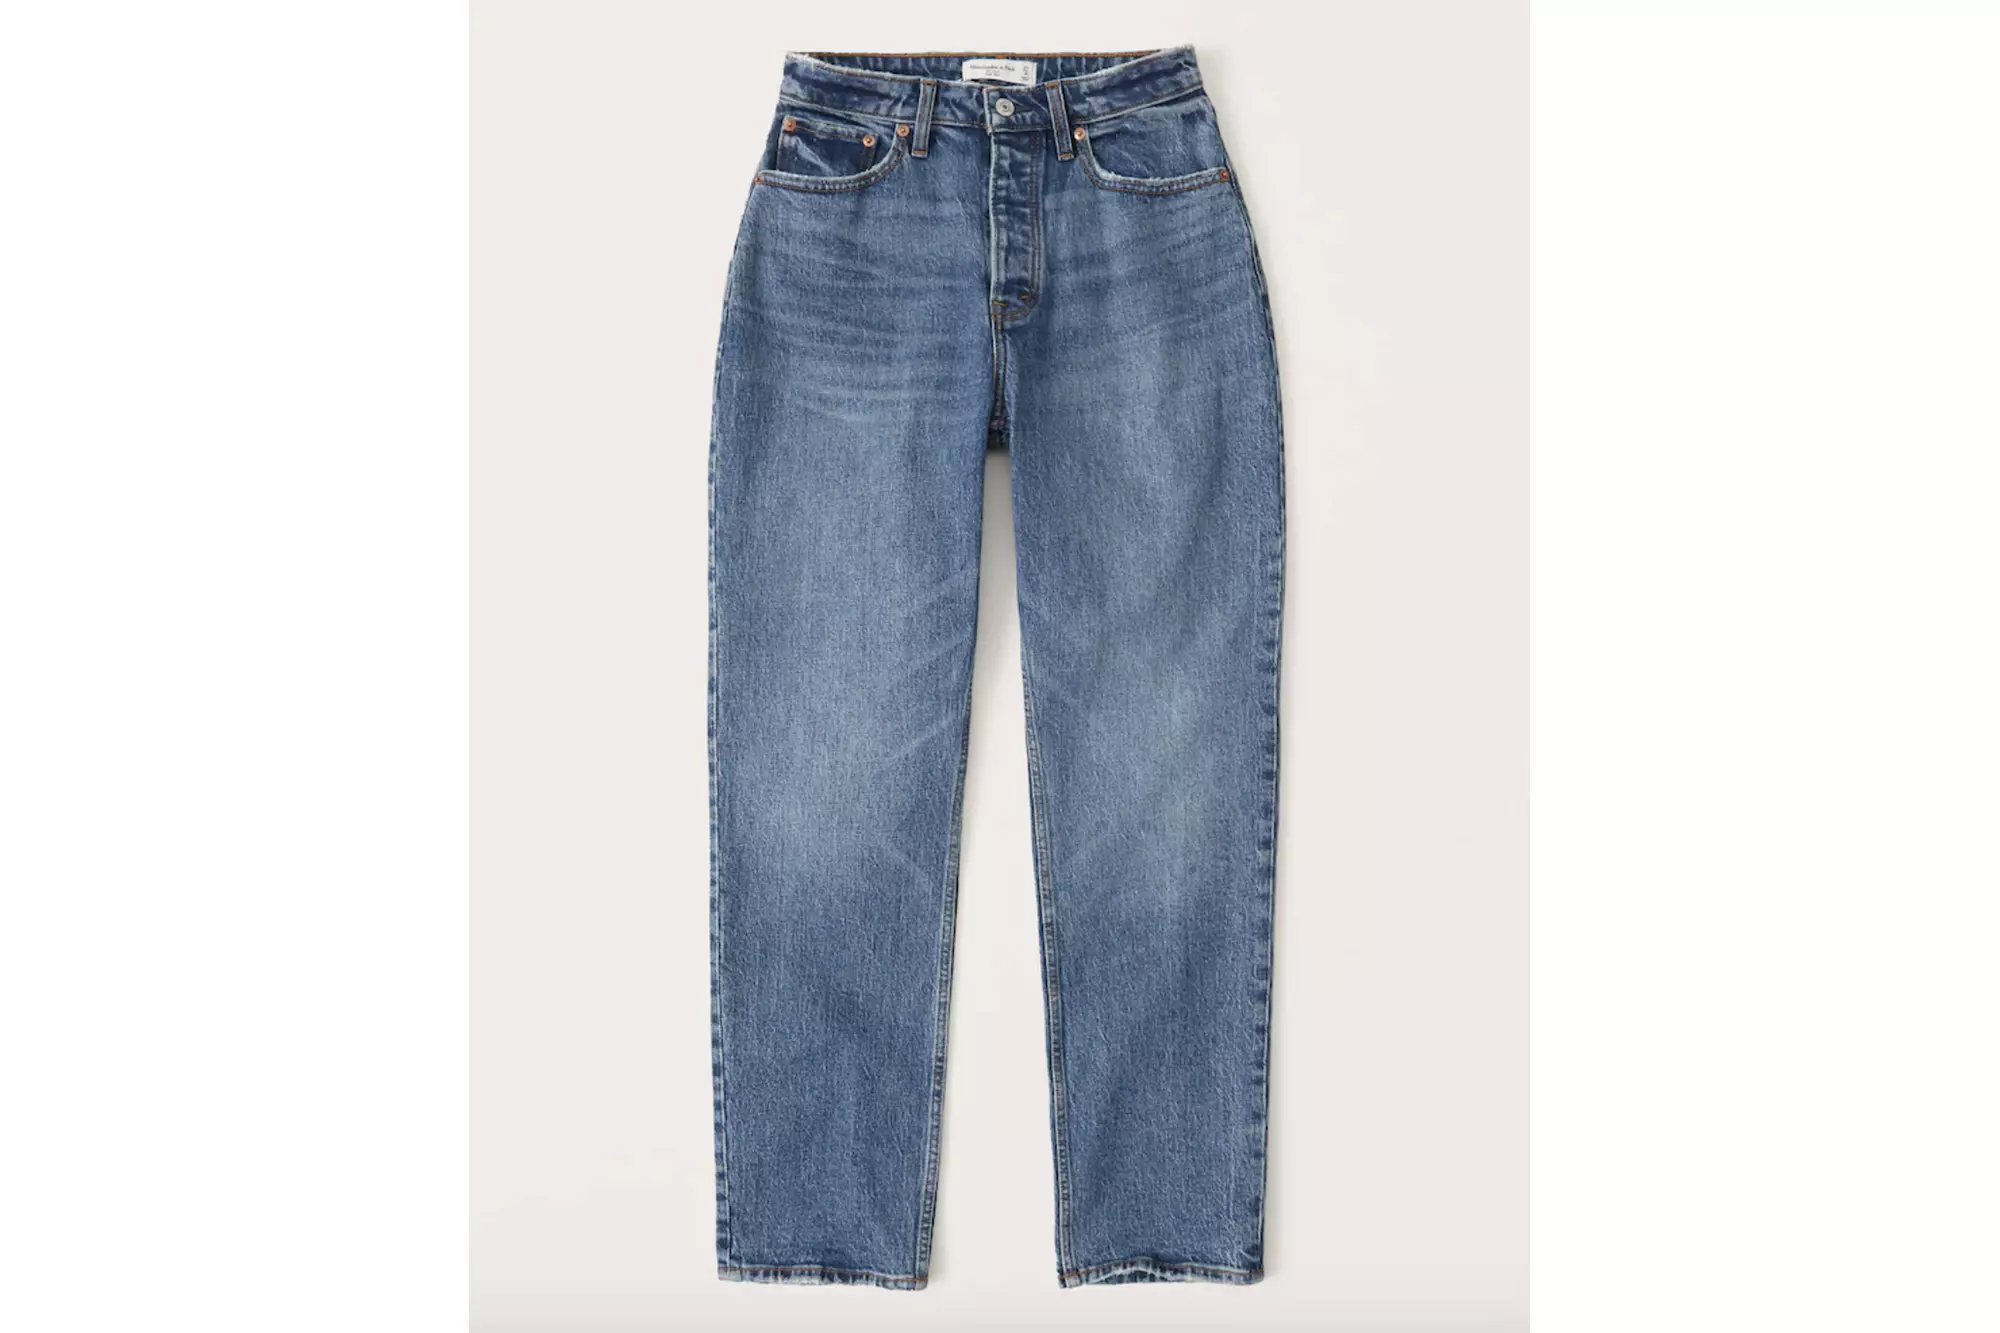 A pair of medium wash Dad jeans from Abercrombie